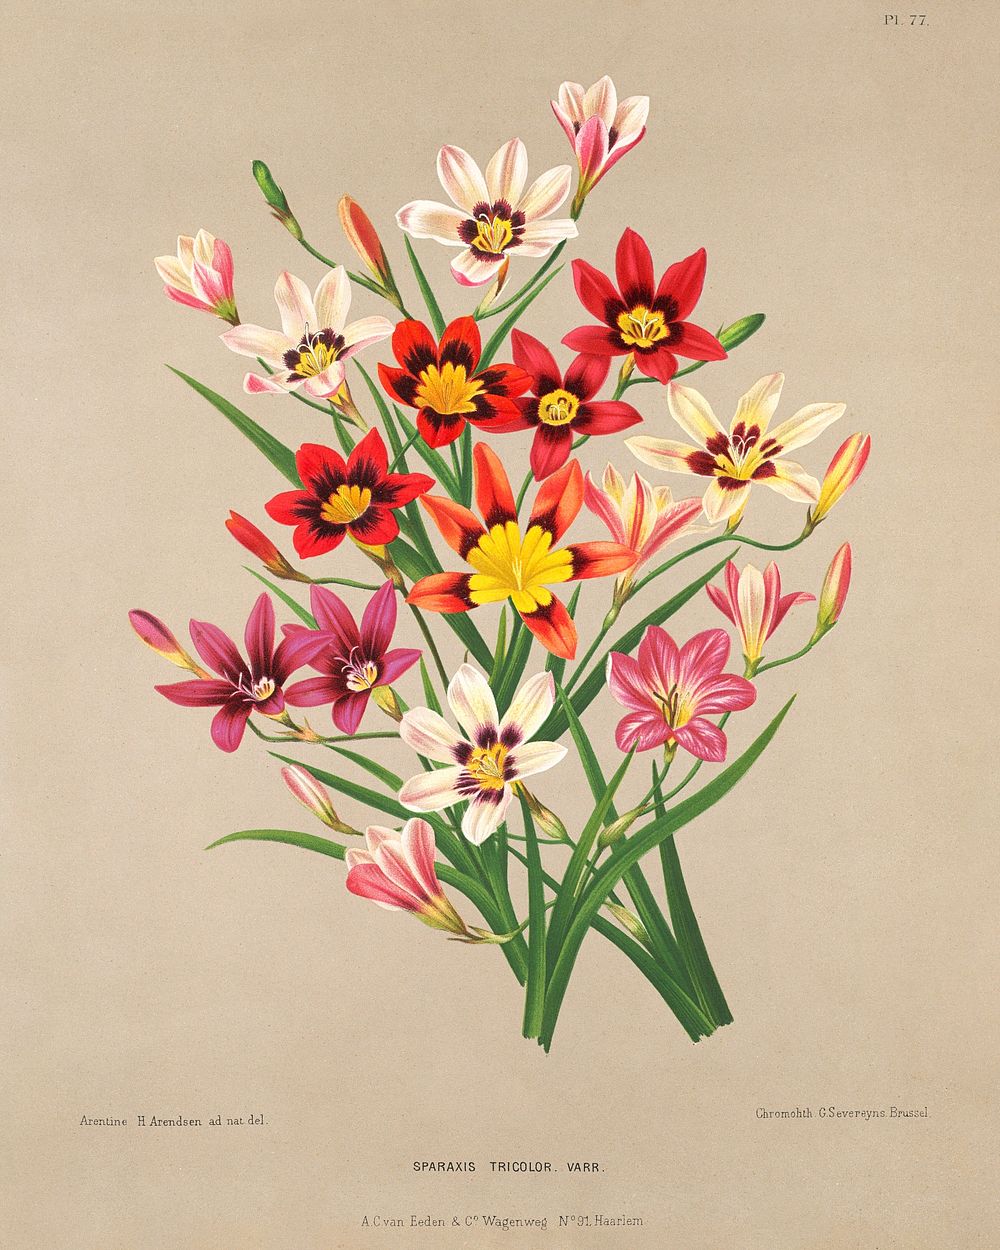 Sparaxis Tricolor Varr., Plate 77 from A. C. Van Eeden's "Flora of Haarlem" (1881) chromolithograph by Arentine H. Arendsen.…